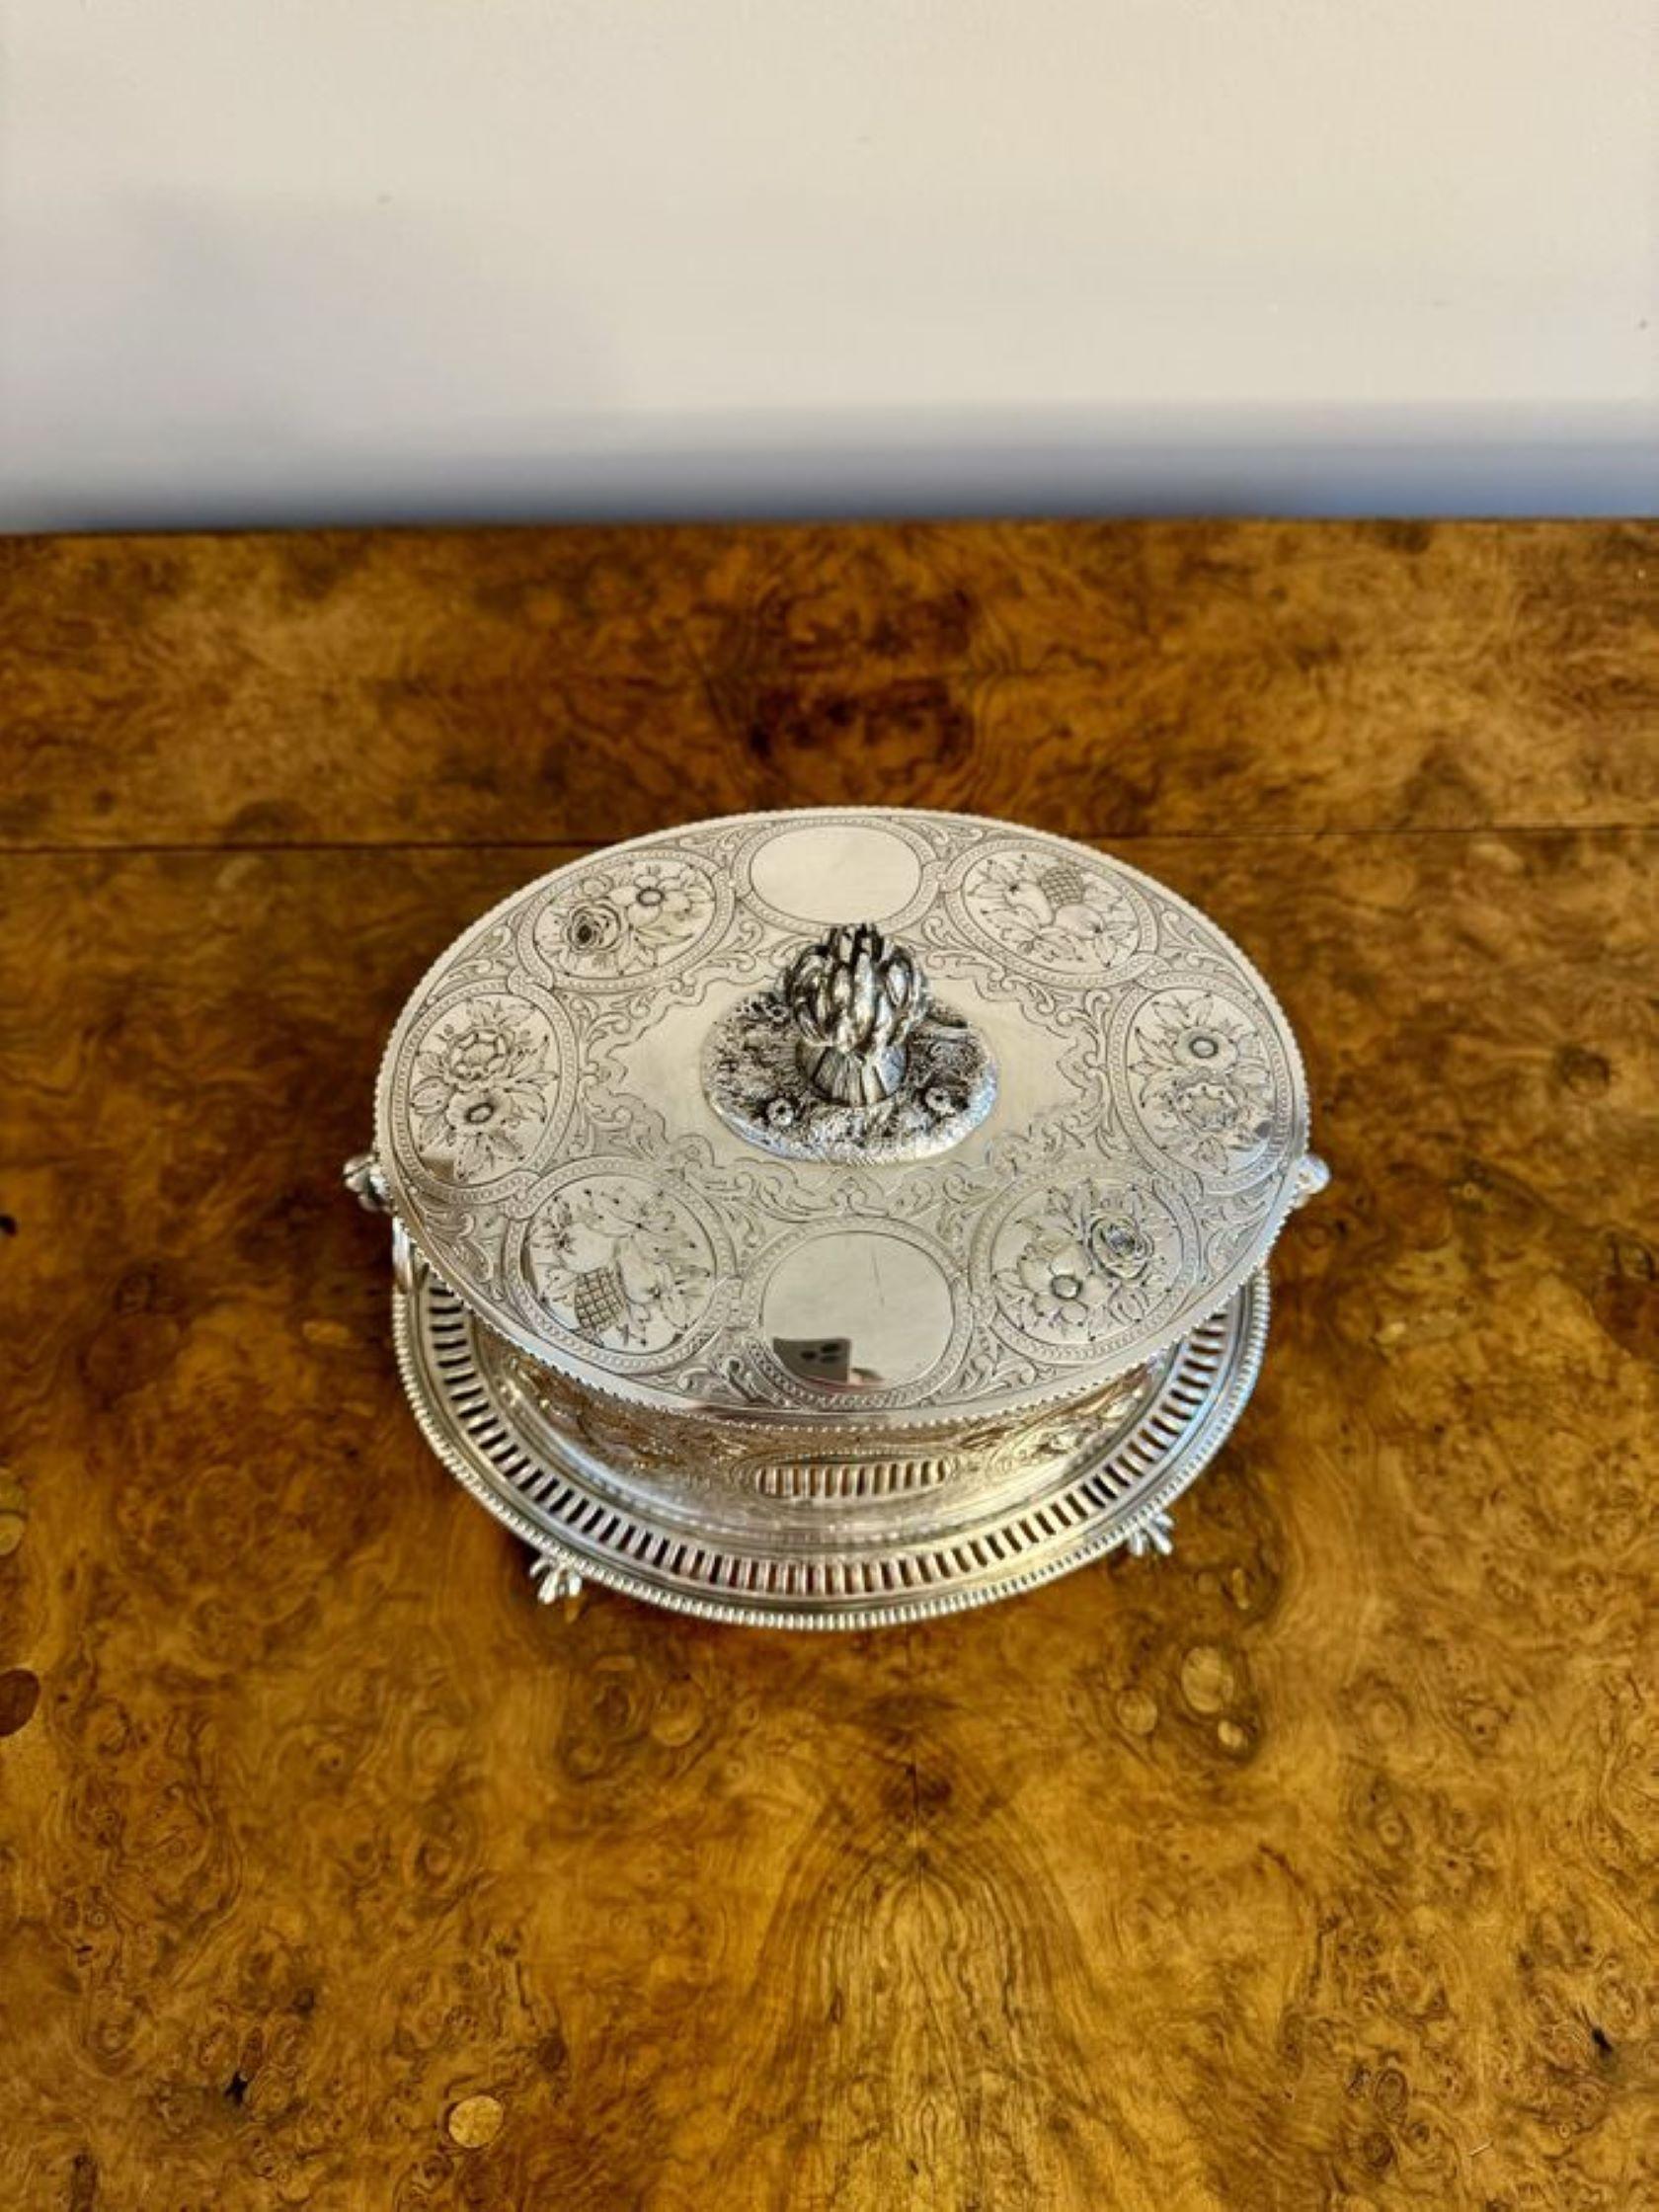 Outstanding quality antique Edwardian ornate silver plated biscuit barrel  For Sale 1